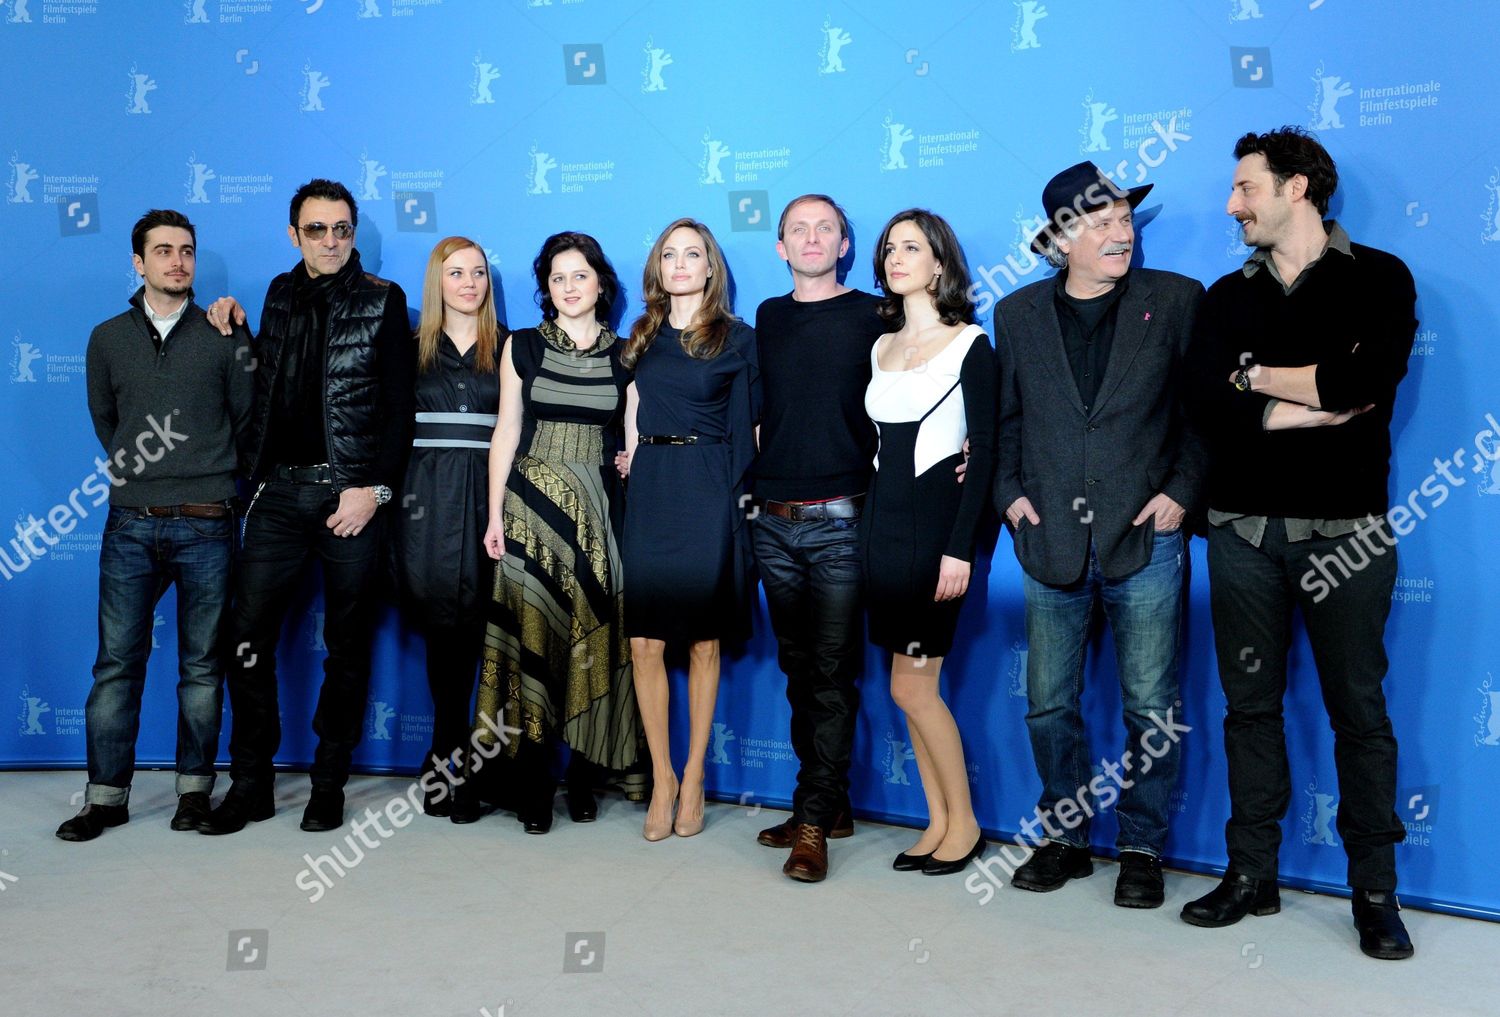 Goran Kostic and Zana Marjanovic attend the In the land of blood and  honey photocall for the 62nd Berlin International Film Festival, in  Berlin, Germany, 11 February 2012. The 62nd Berlinale takes